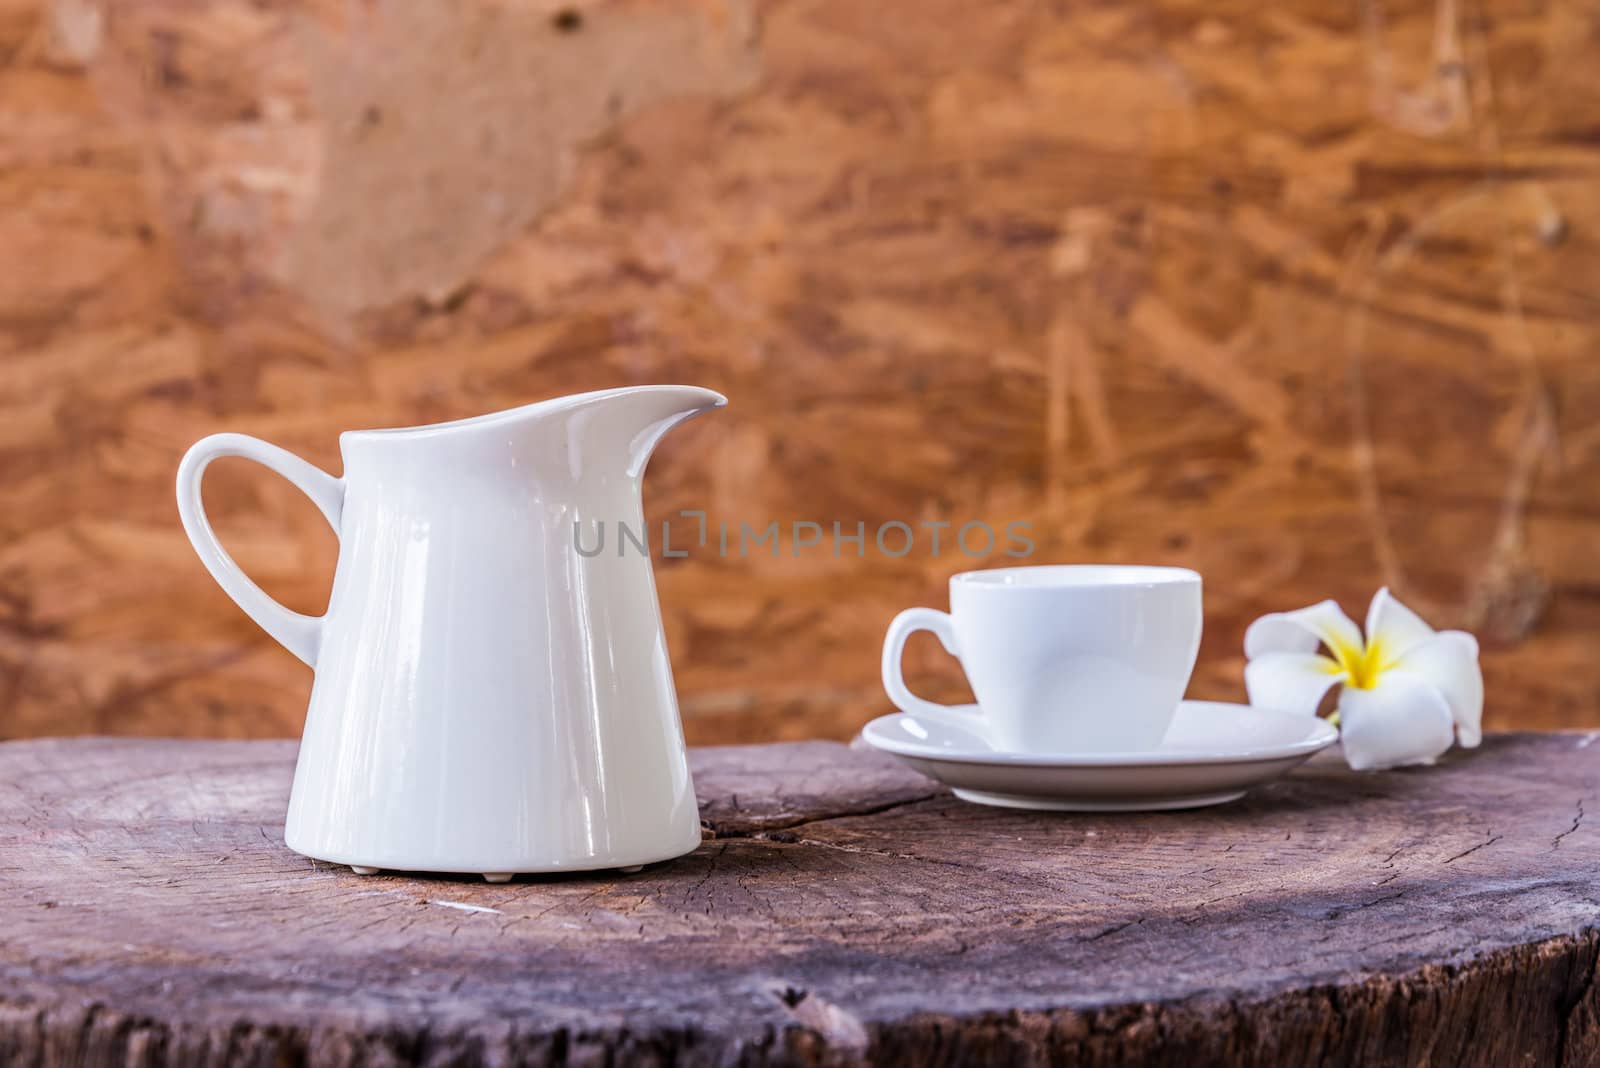 White cup with white tea pot on wood background by wmitrmatr